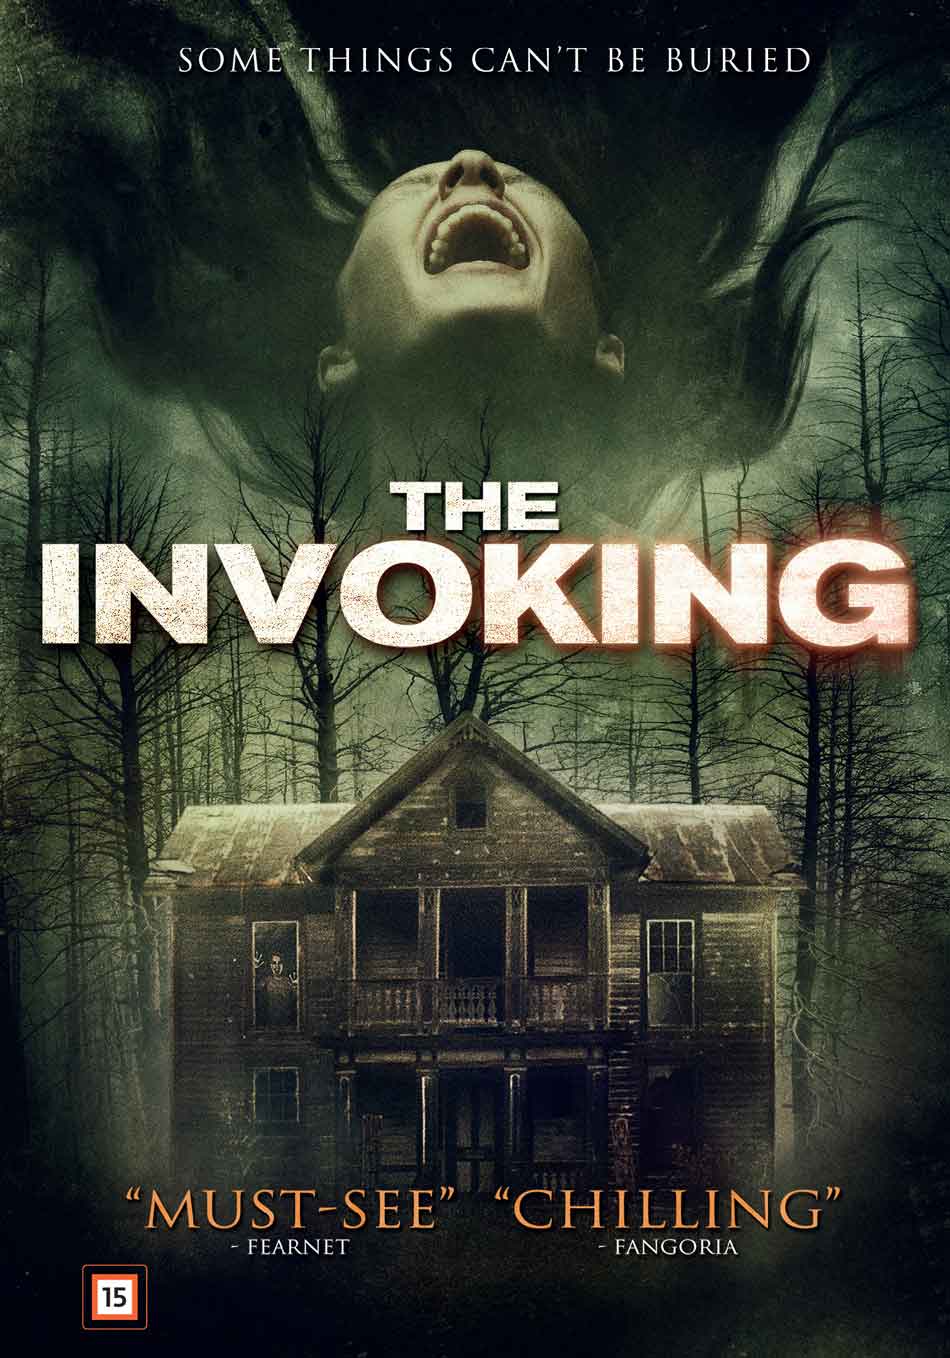 The Invoking